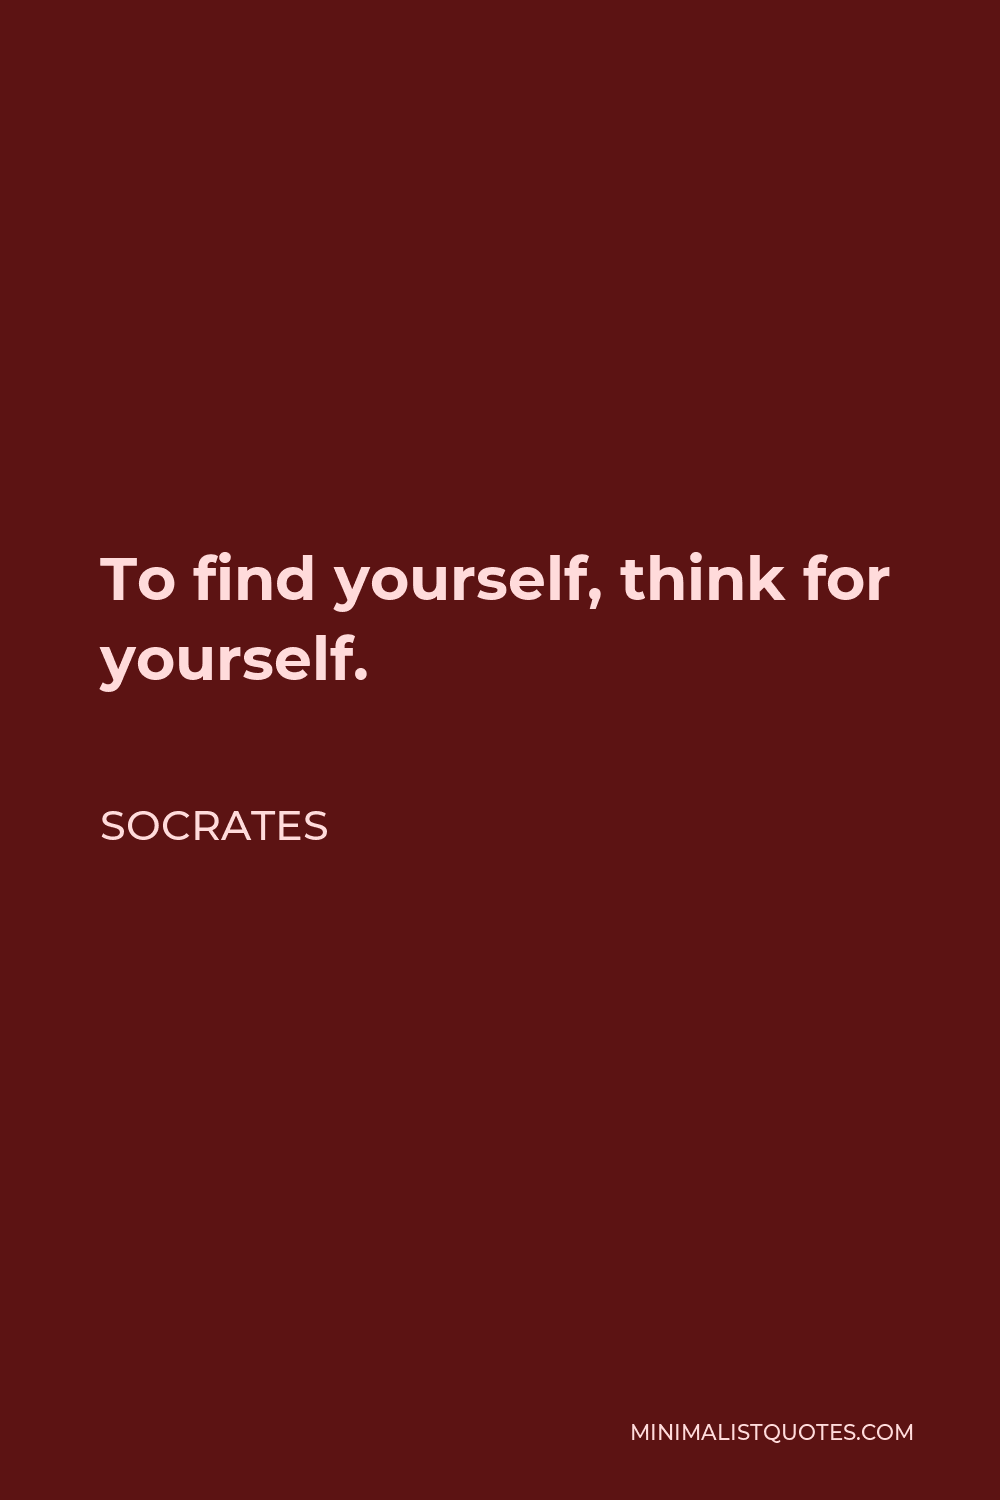 Socrates Quote - To find yourself, think for yourself.